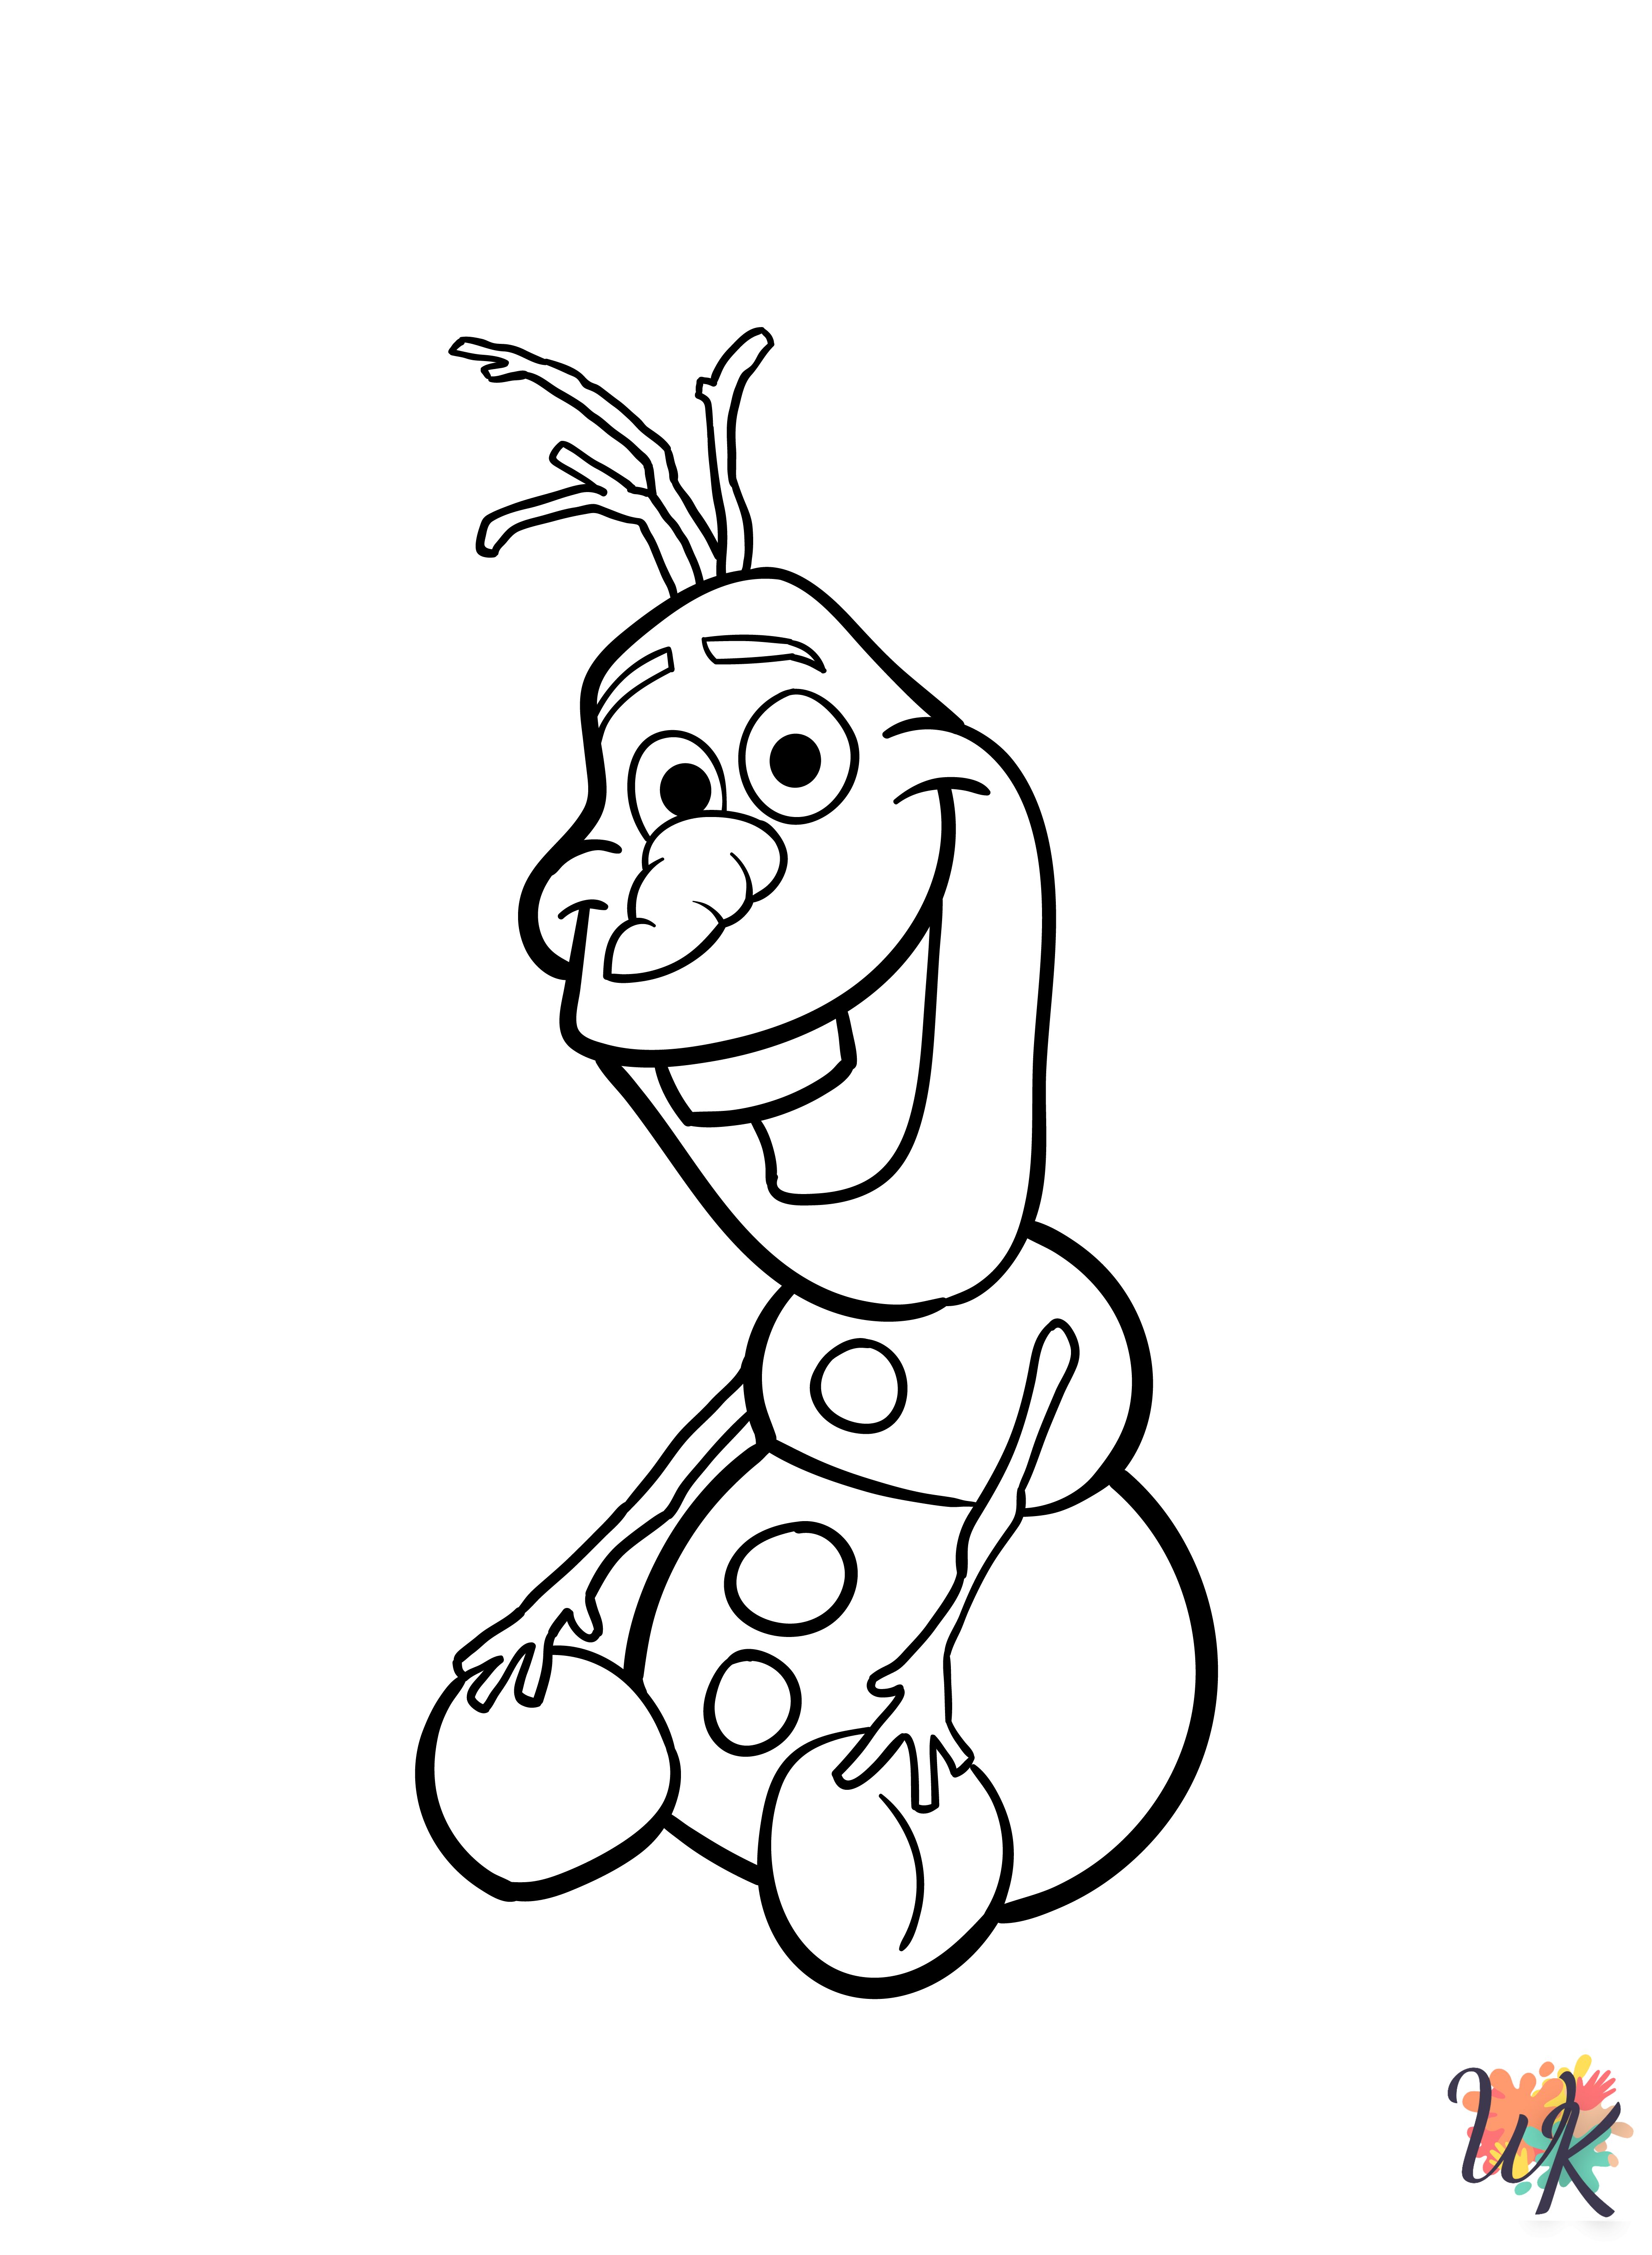 free full size printable Olaf coloring pages for adults pdf